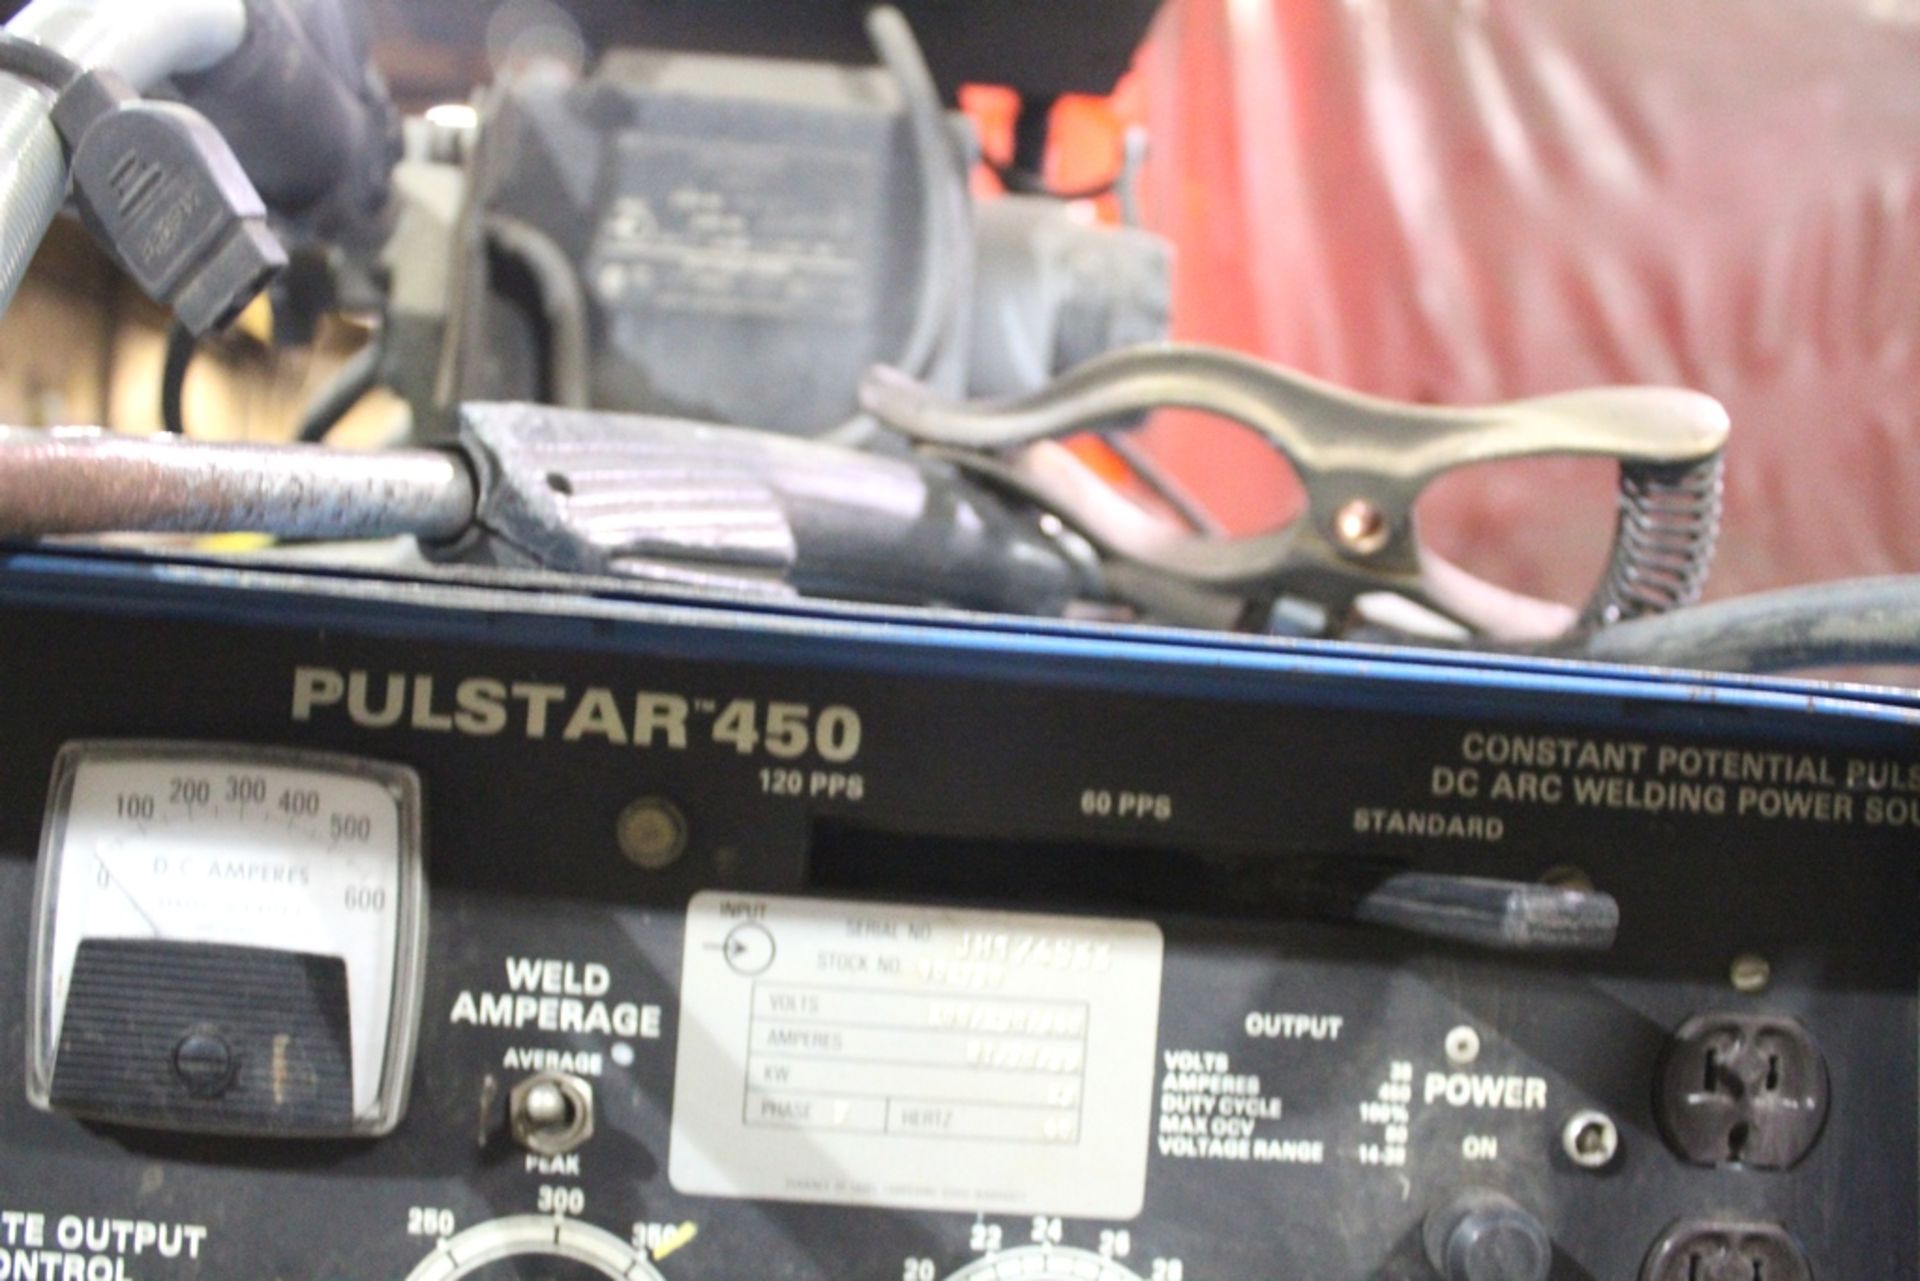 MILLER MODEL PULSTAR 450 CONSTANT VOLTAGE PULSED DC ARC WELDING POWER SOURCE, S/N JH174533, WITH - Image 3 of 4